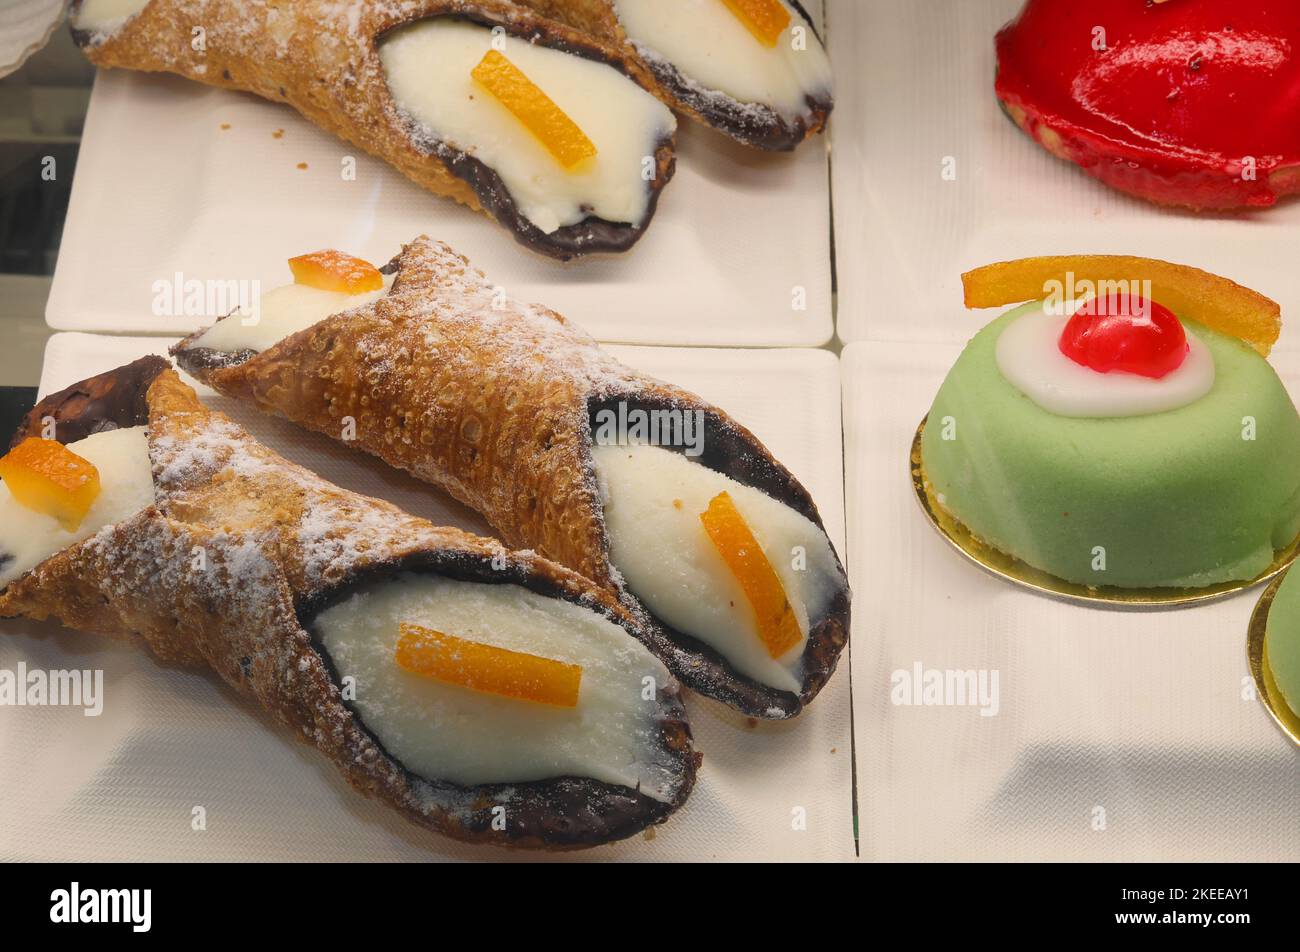 Sicilian cannoli typical pastries from Southern Italy made with ricotta Cheese Stock Photo